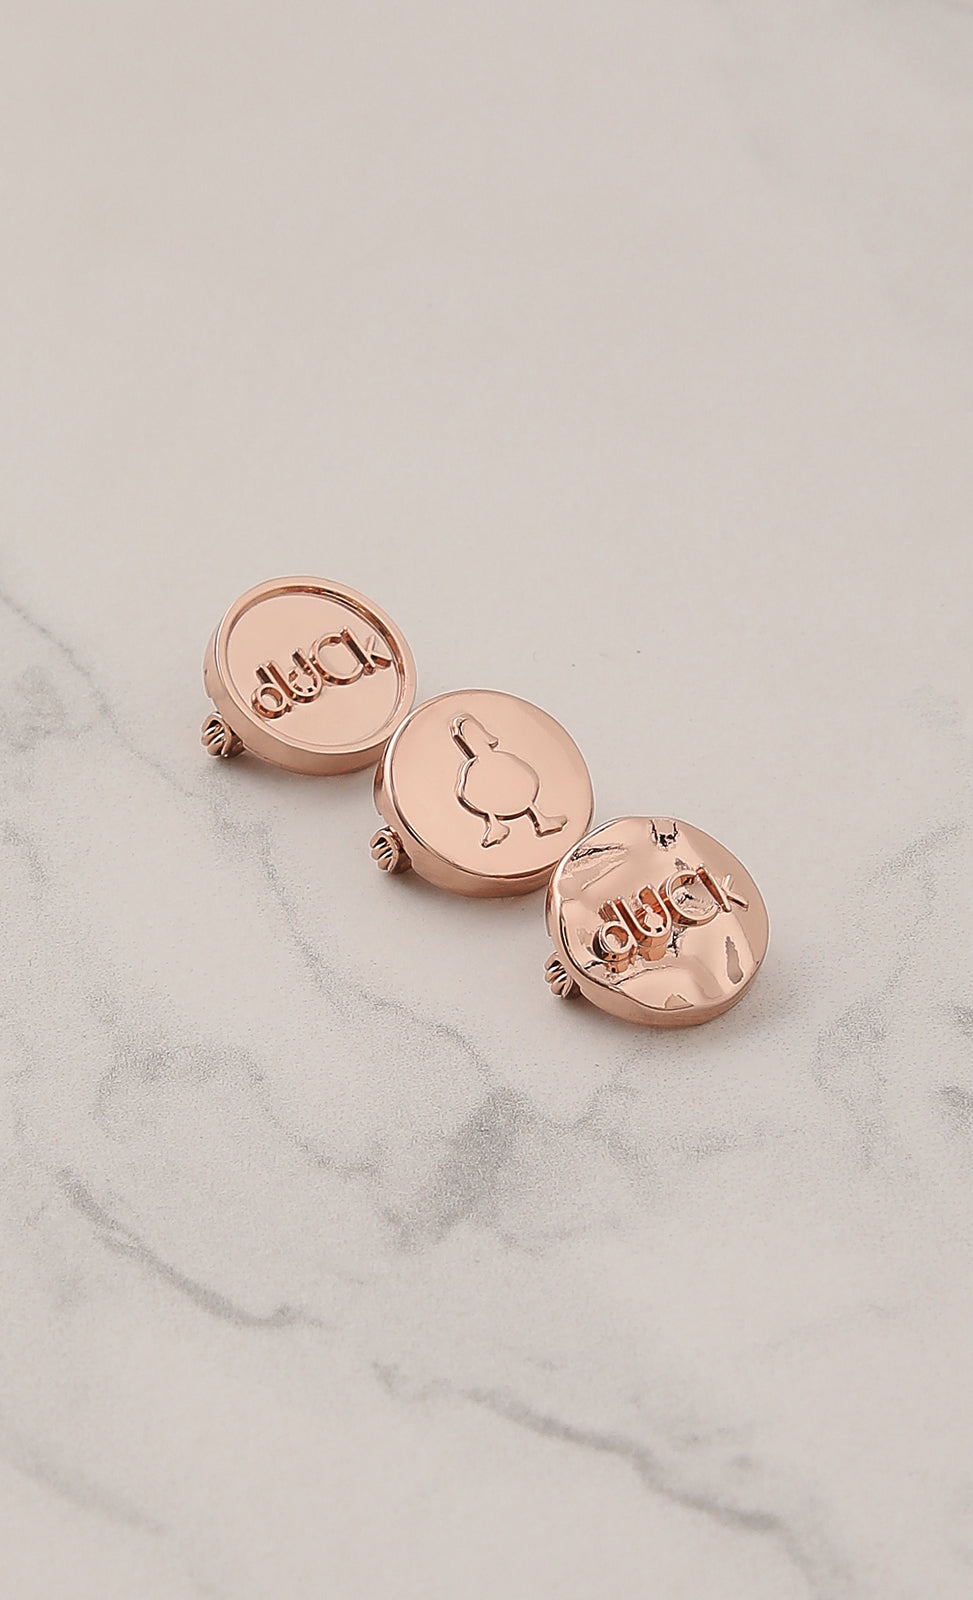 Trio dUCk Pin Set in Rose Gold